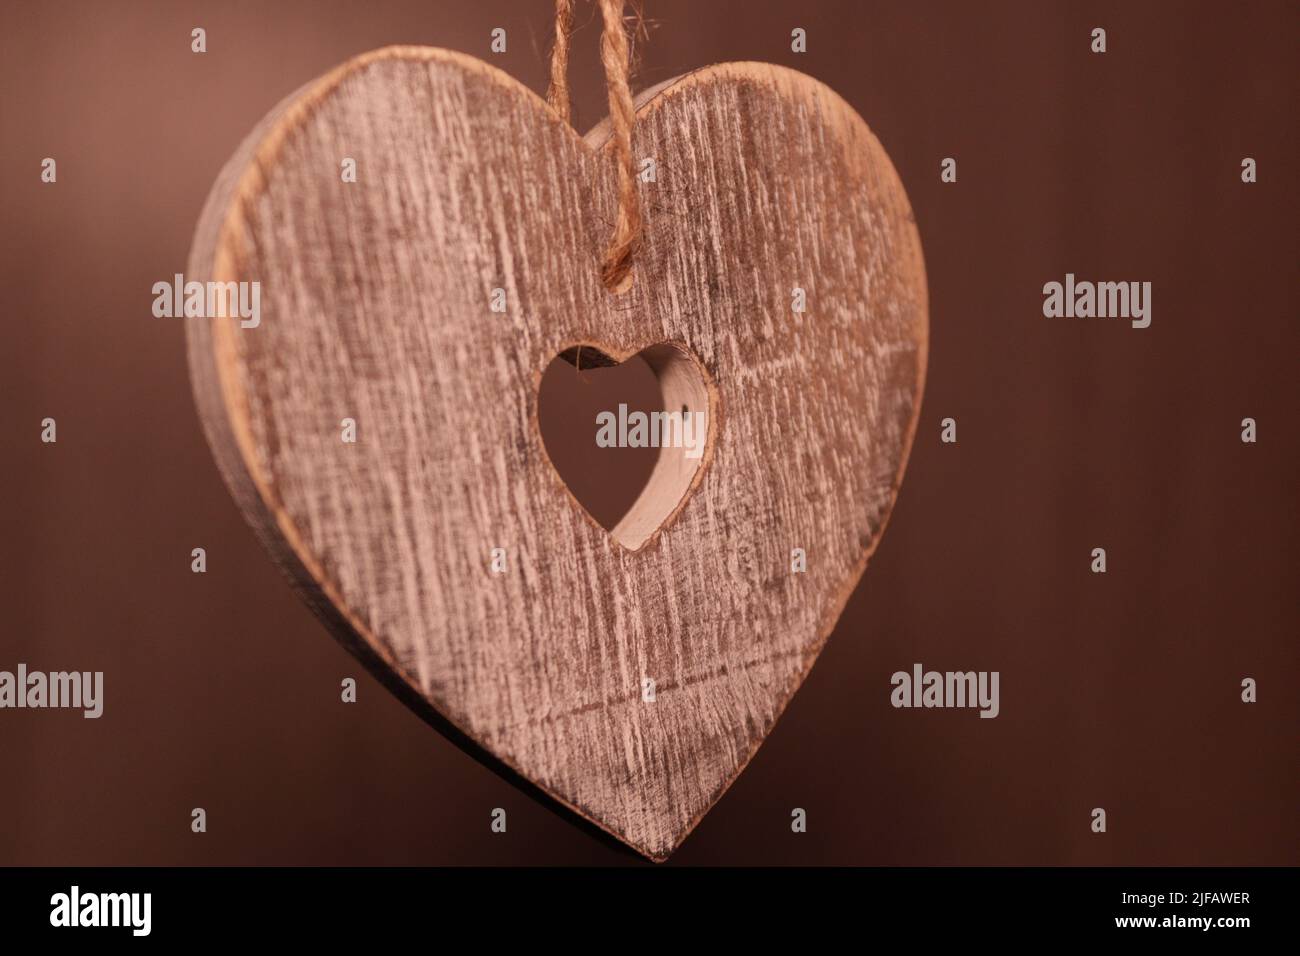 Grey wooden heart suspended by string against a dark background Stock Photo